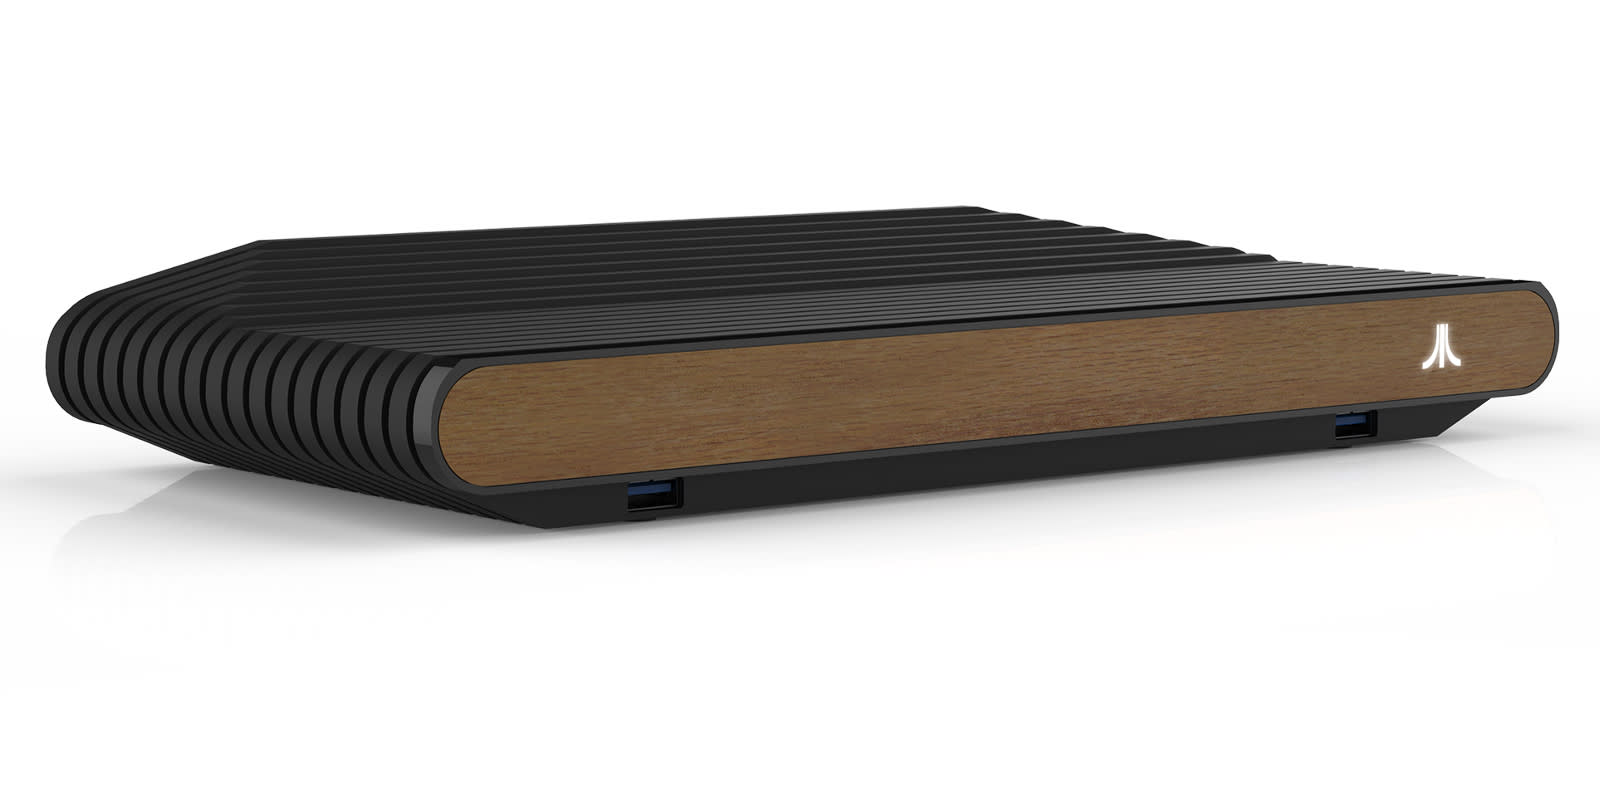 Finished Atari VCS design pays homage to its 2600 roots - Engadget